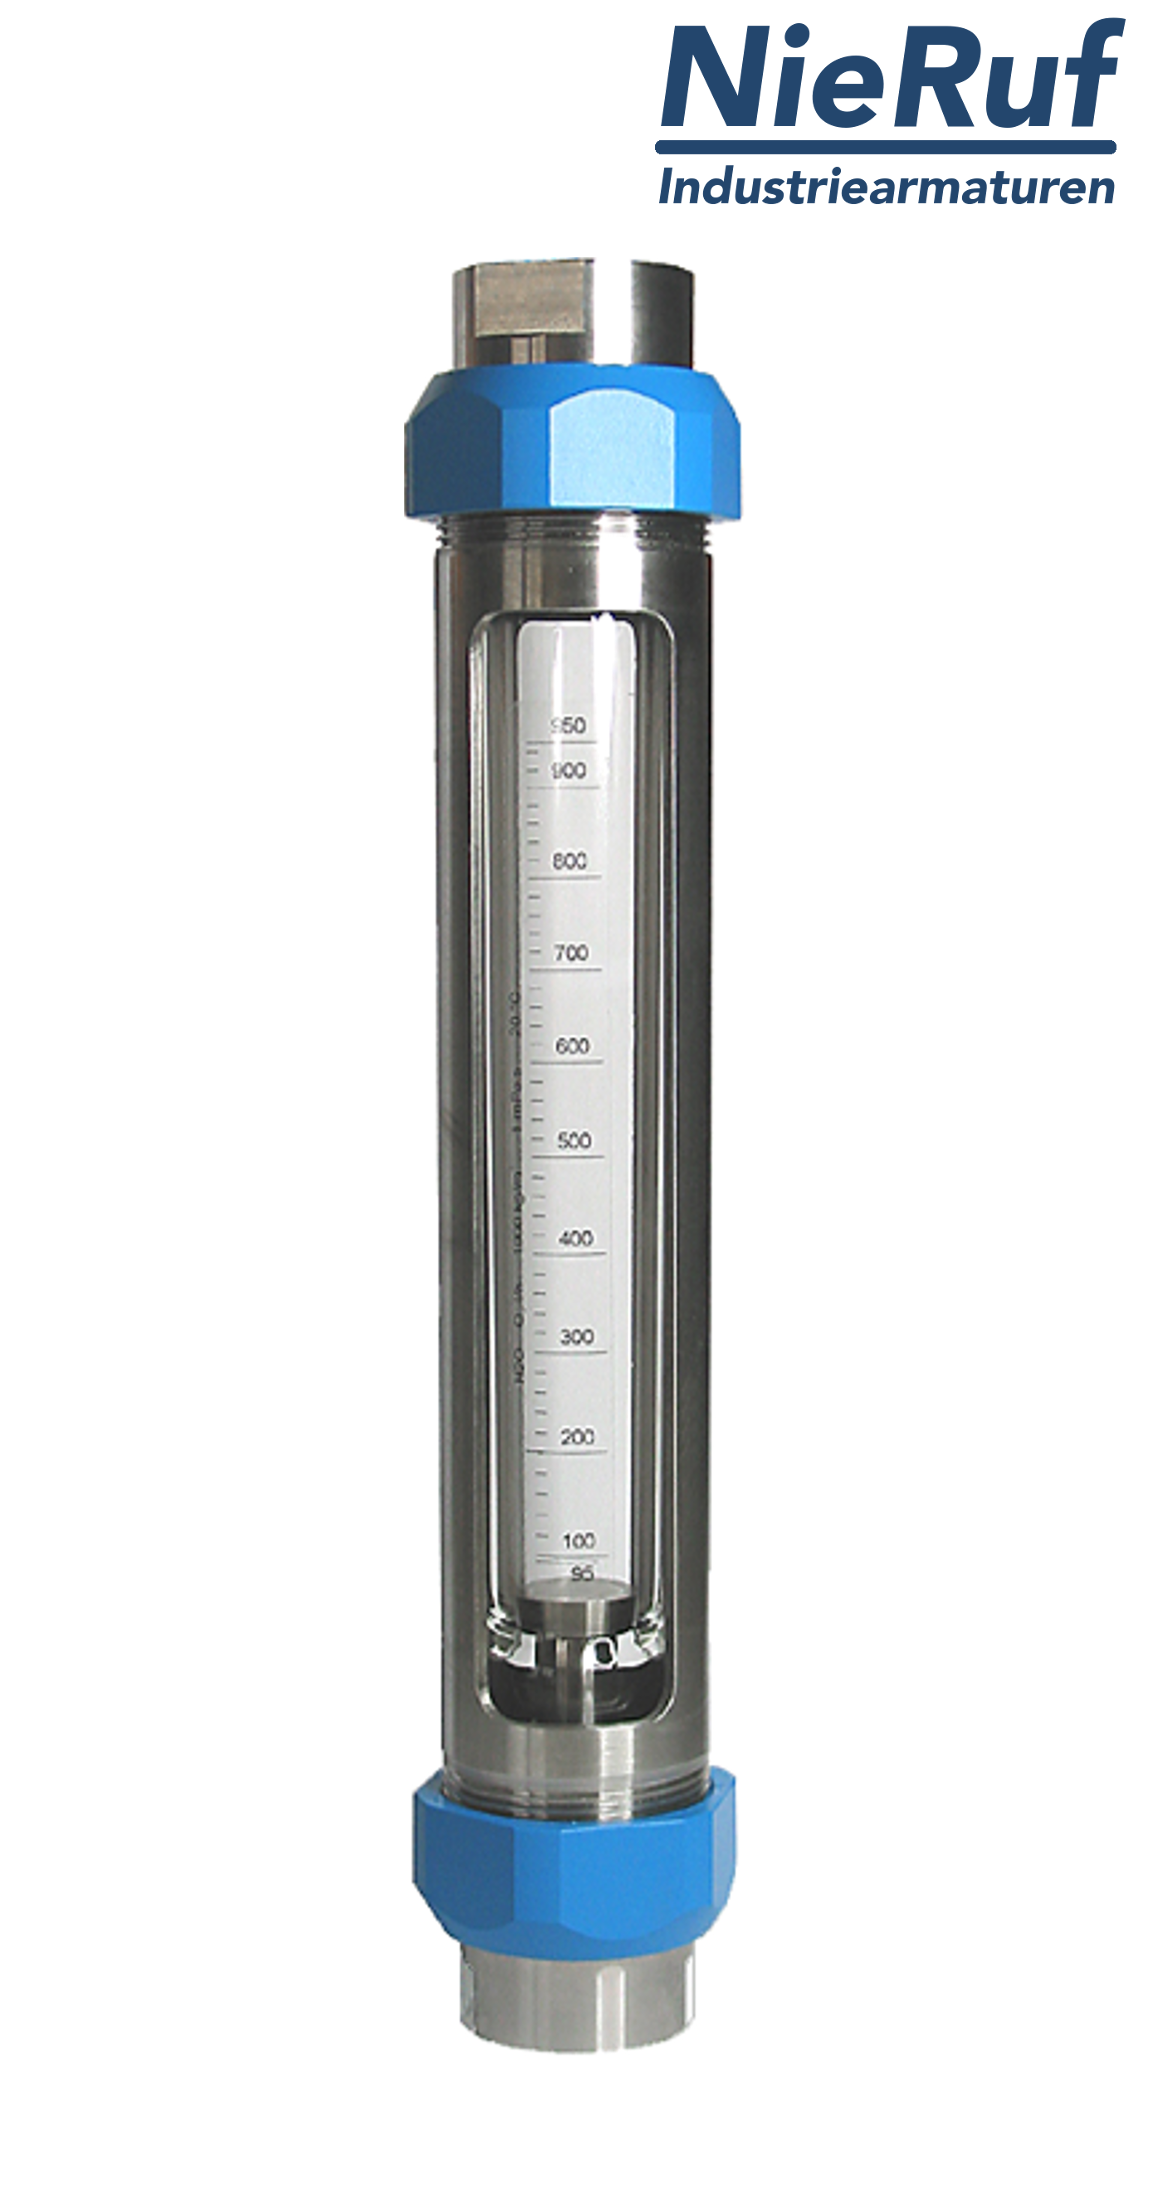 Variable area flowmeter stainless steel + borosilicate 1/2" inch 0.5 - 5.0 l/h water FKM